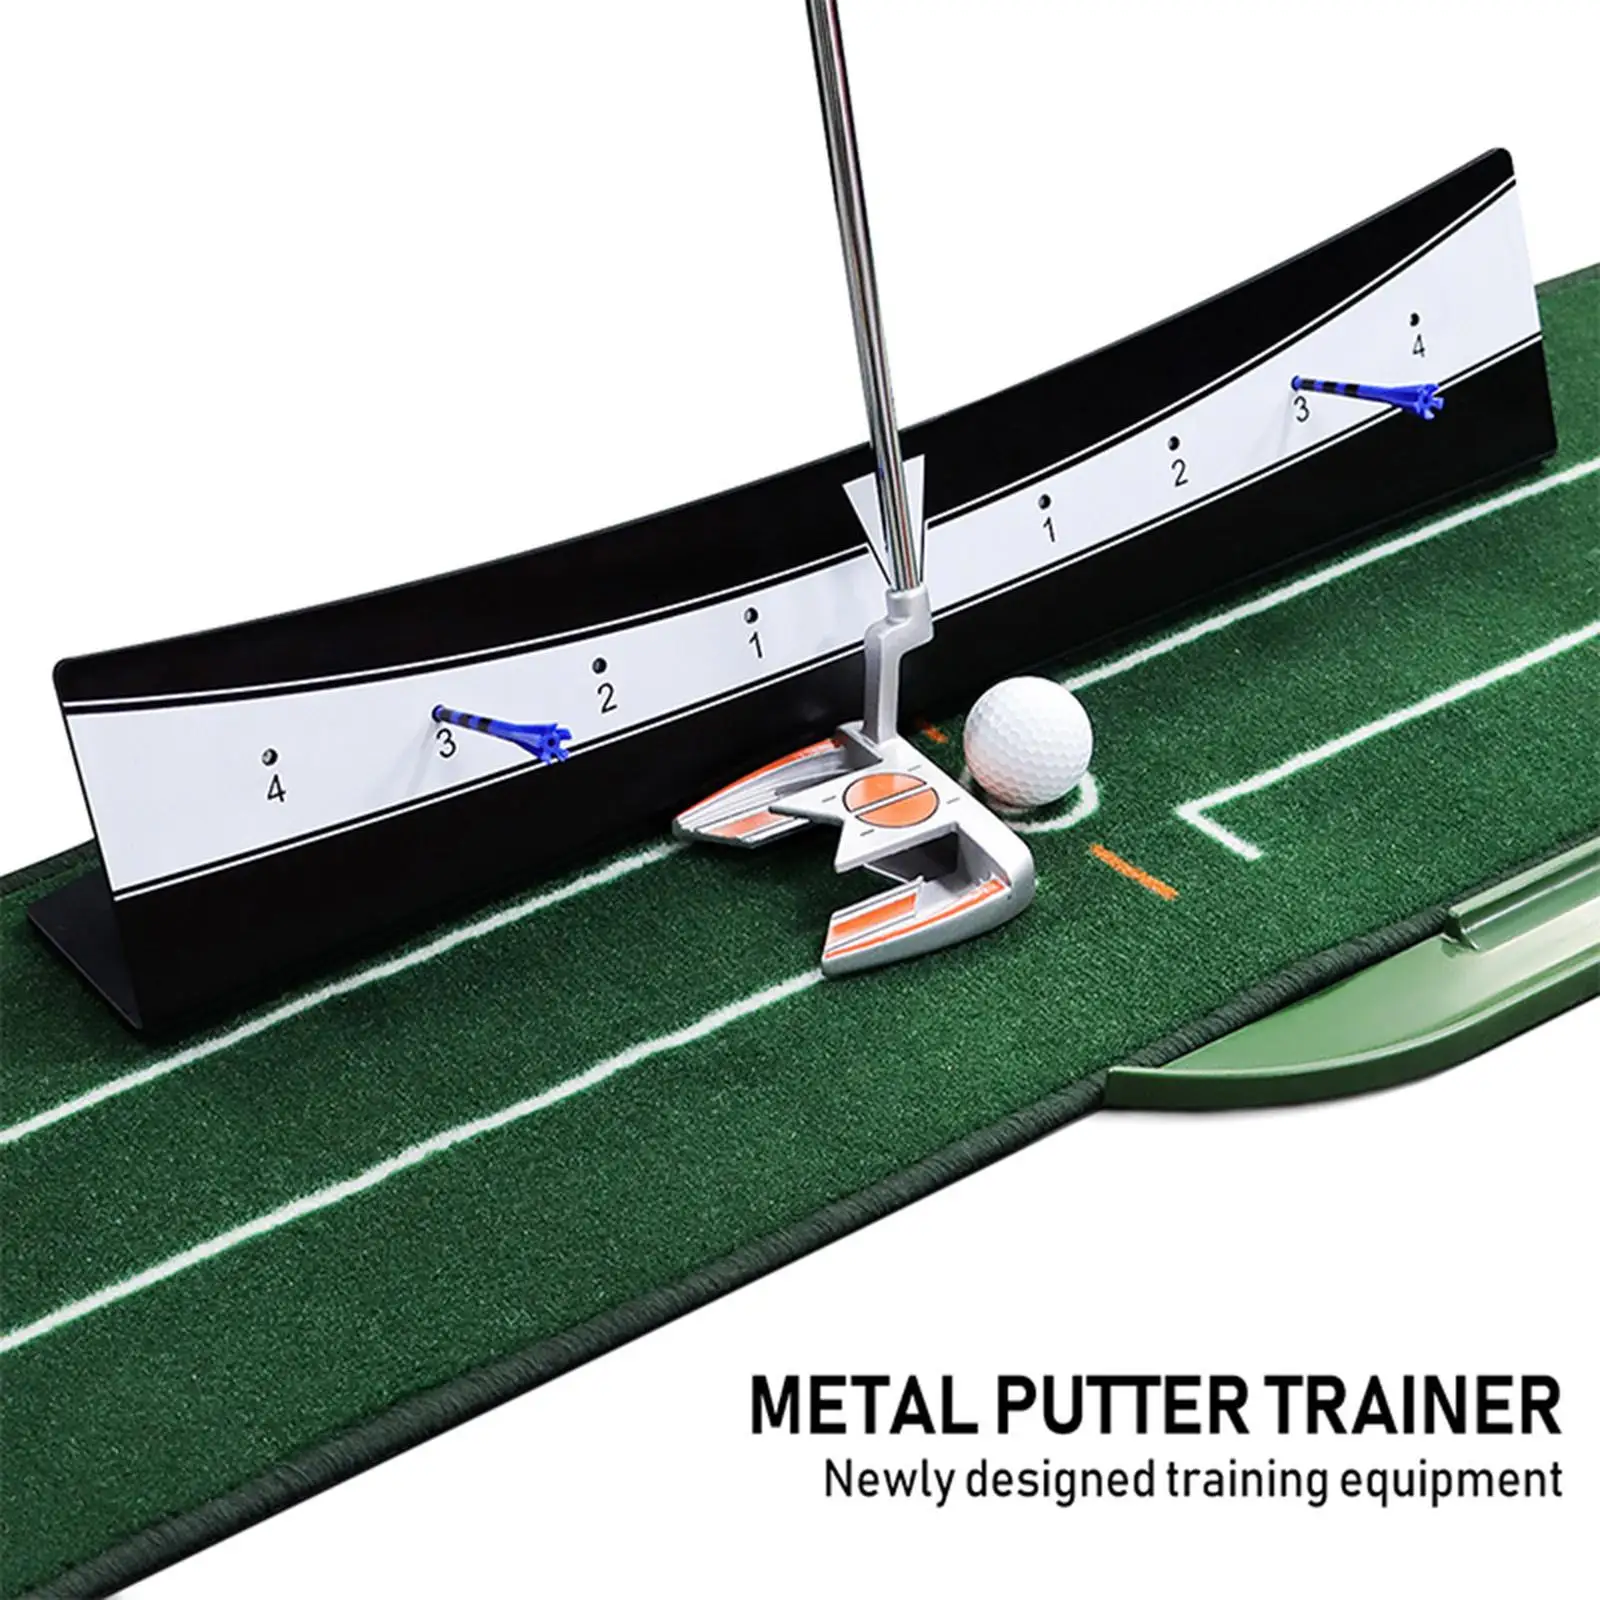 Golf Alignment Balance Imorove Your Golf Putting Skill Putting Plane Rail Swing Trainer for Game Women Indoor Outdoor Equipment